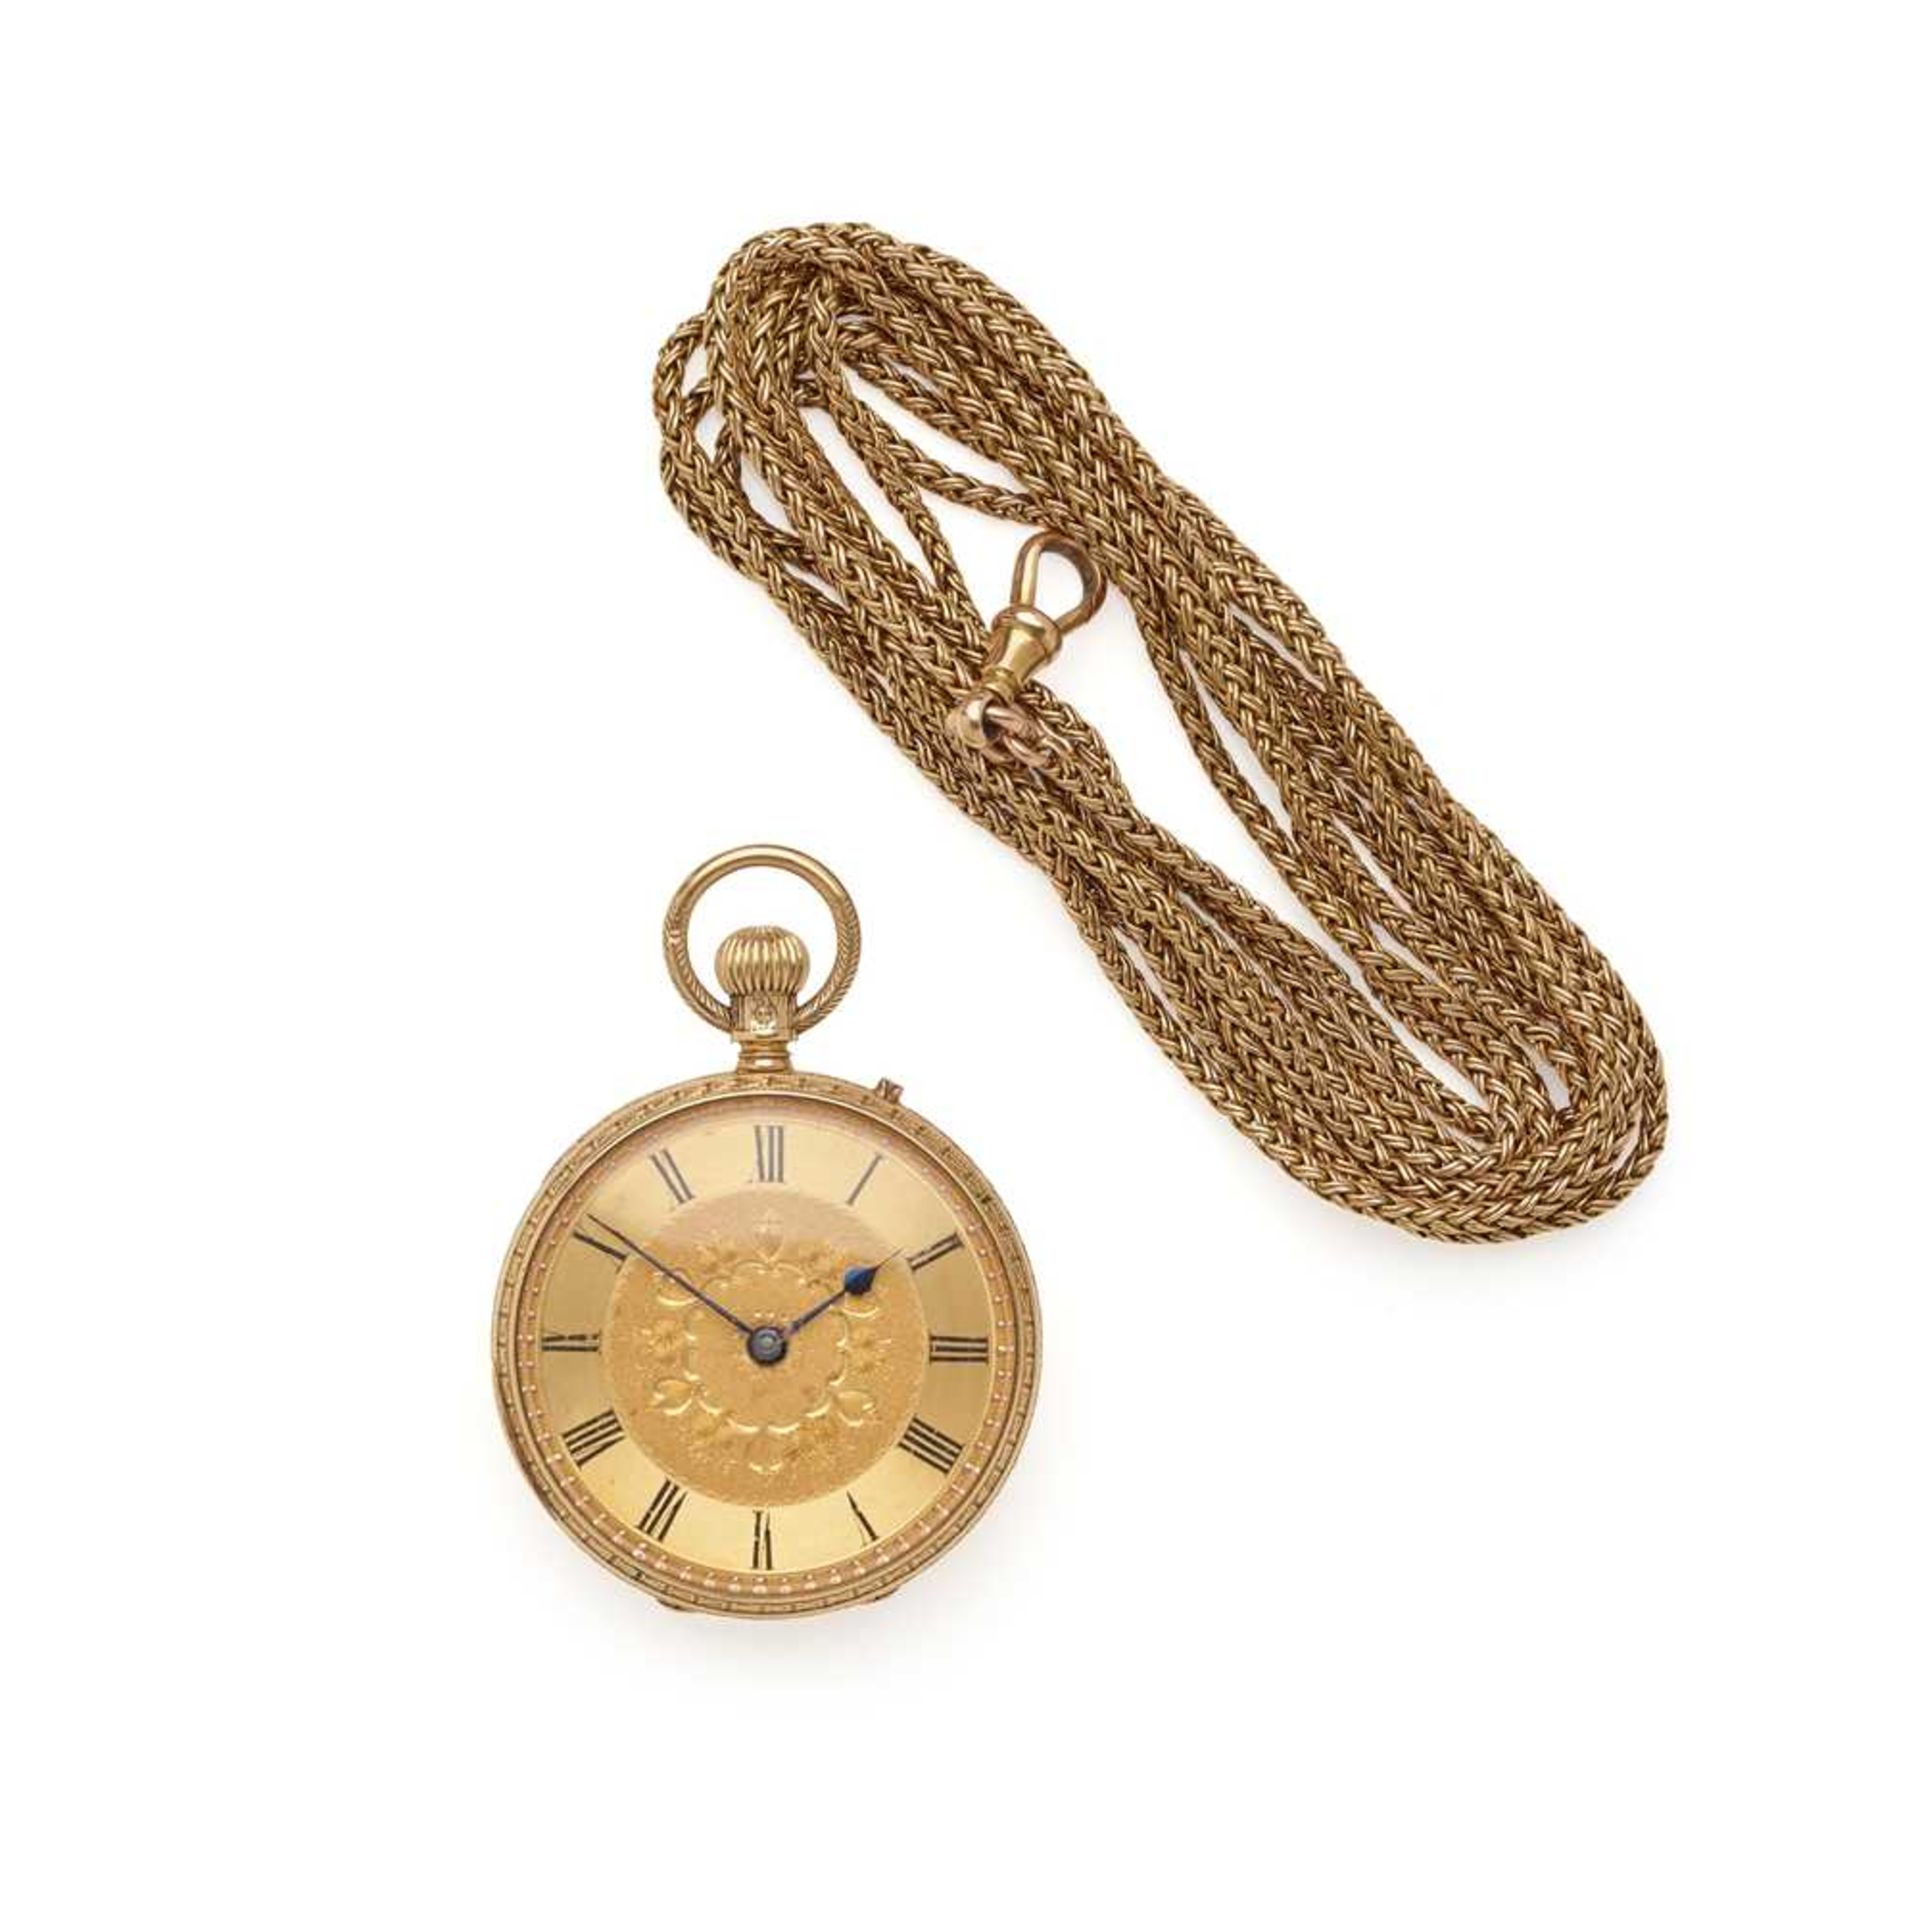 An 18ct gold pocket watch and chain